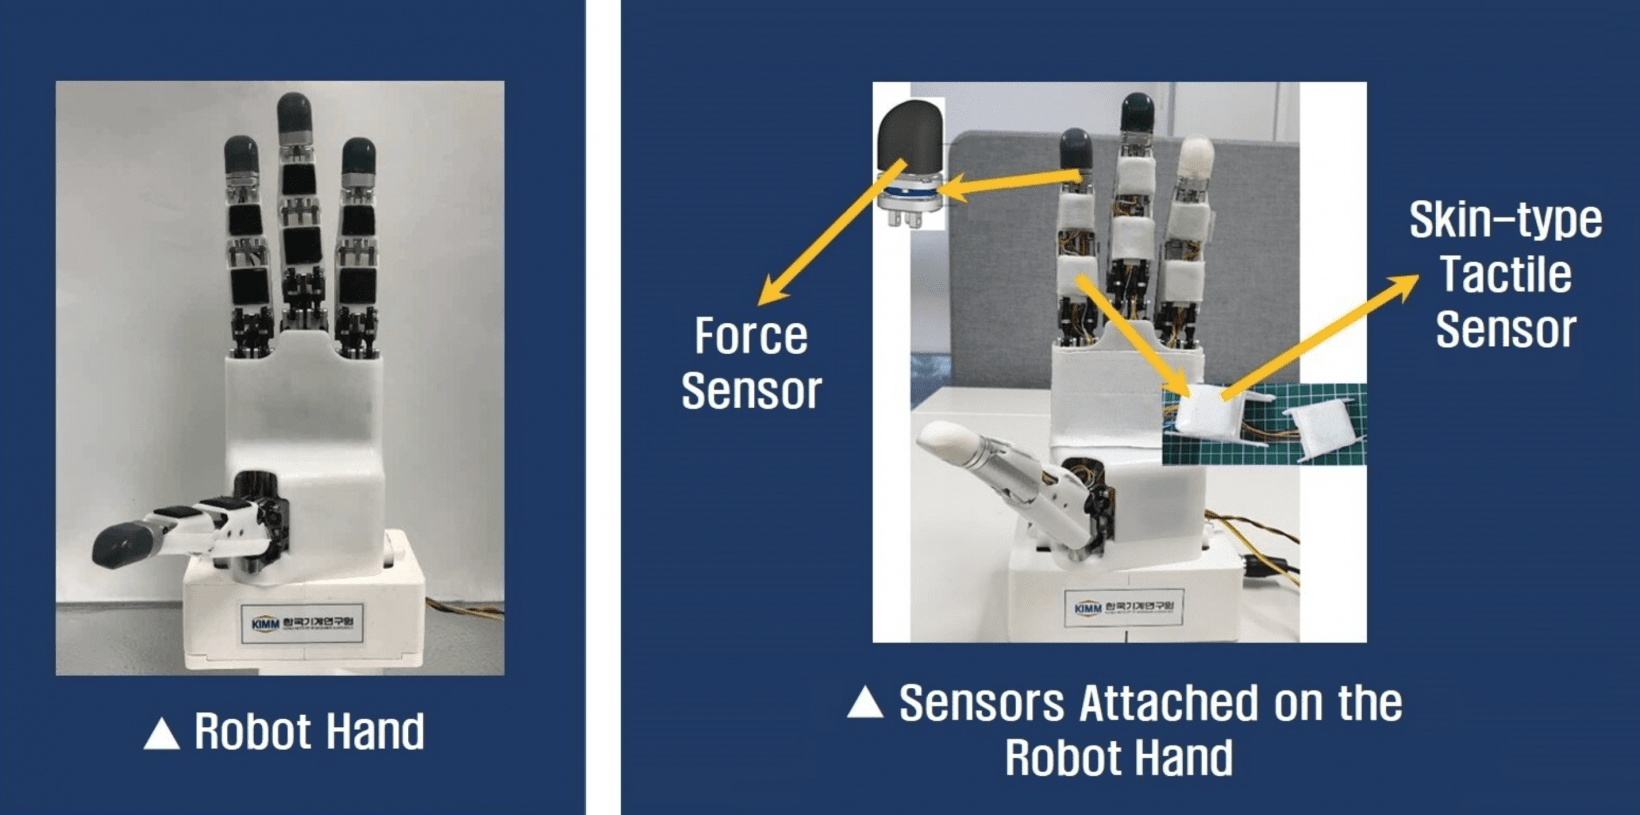 The hand is equipped with both force sensors and 'skin-type' tactile sensors